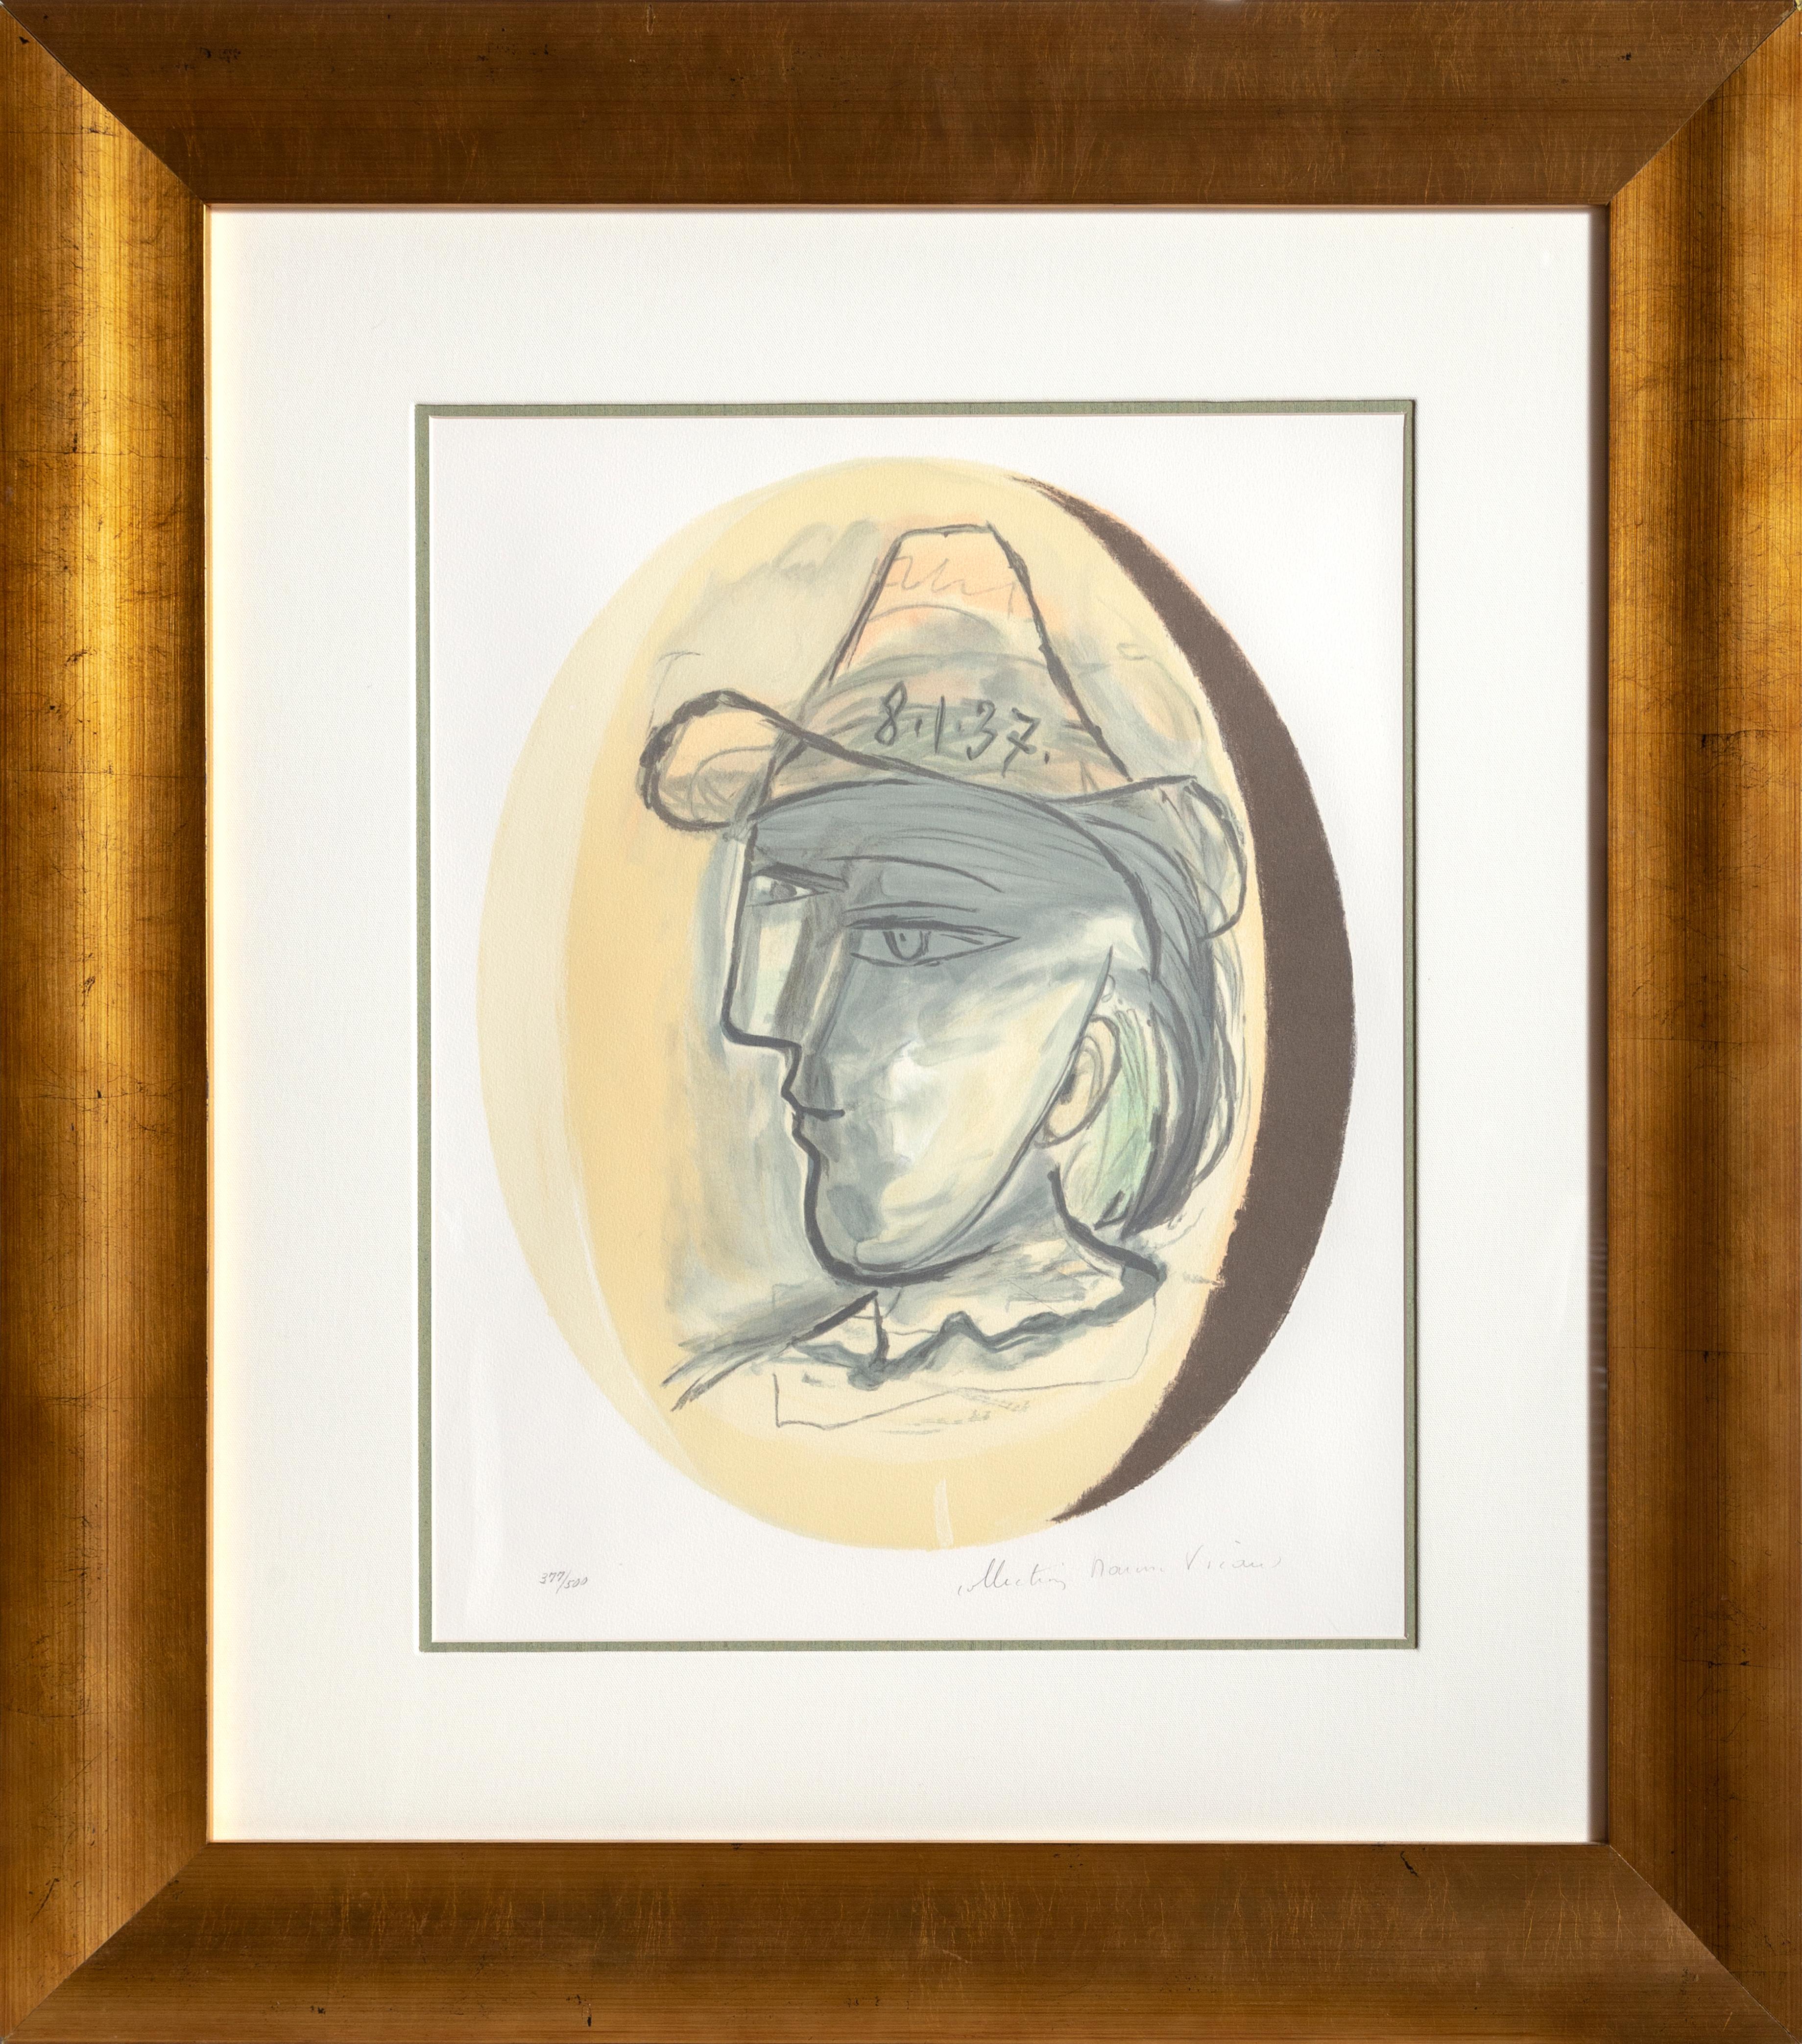 A lithograph from the Marina Picasso Estate Collection after the Pablo Picasso painting "Tete".  The original painting was completed in 1937. In the 1970's after Picasso's death, Marina Picasso, his granddaughter, authorized the creation of this